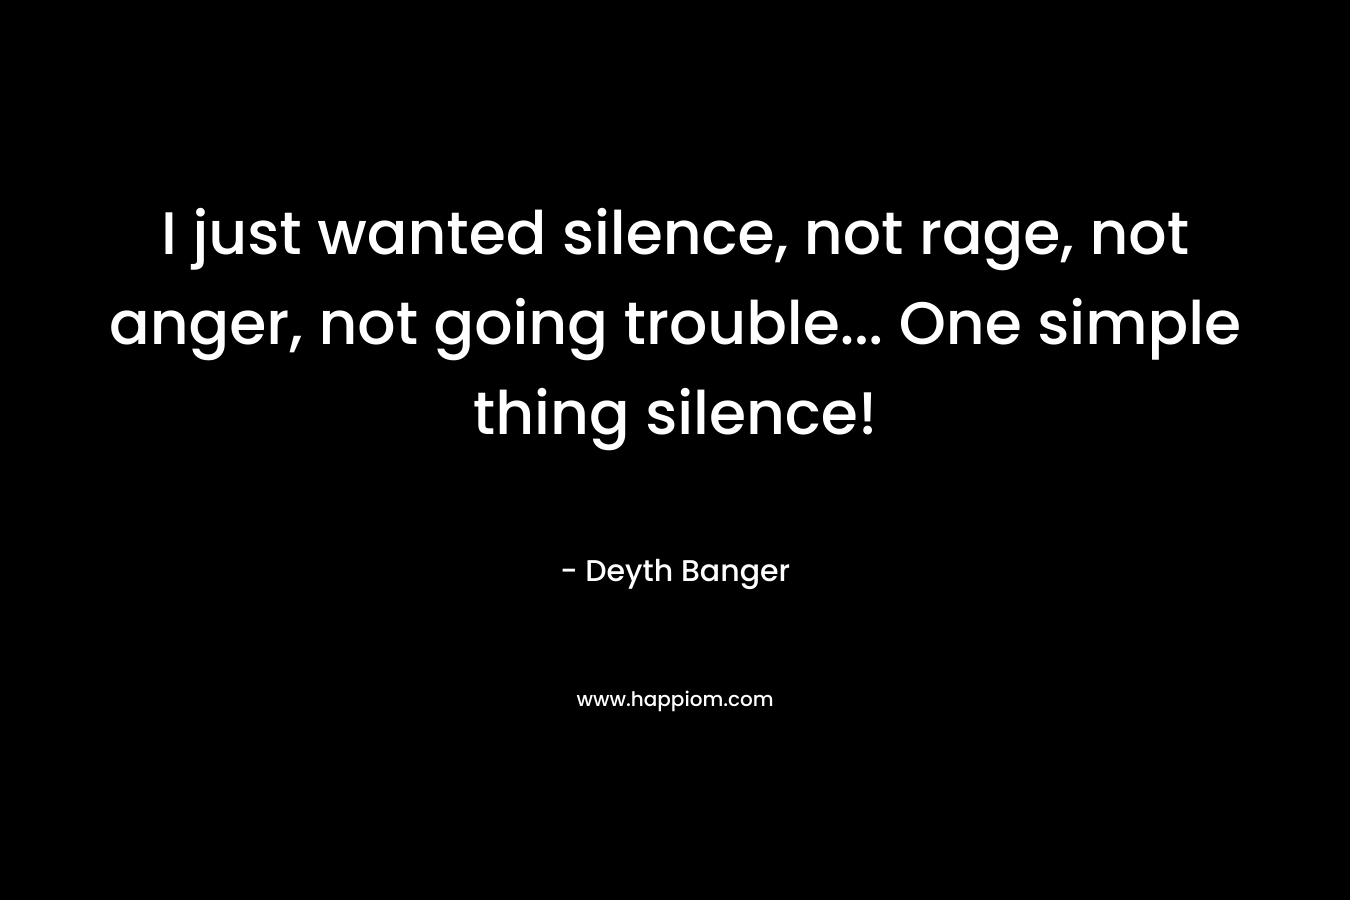 I just wanted silence, not rage, not anger, not going trouble... One simple thing silence!